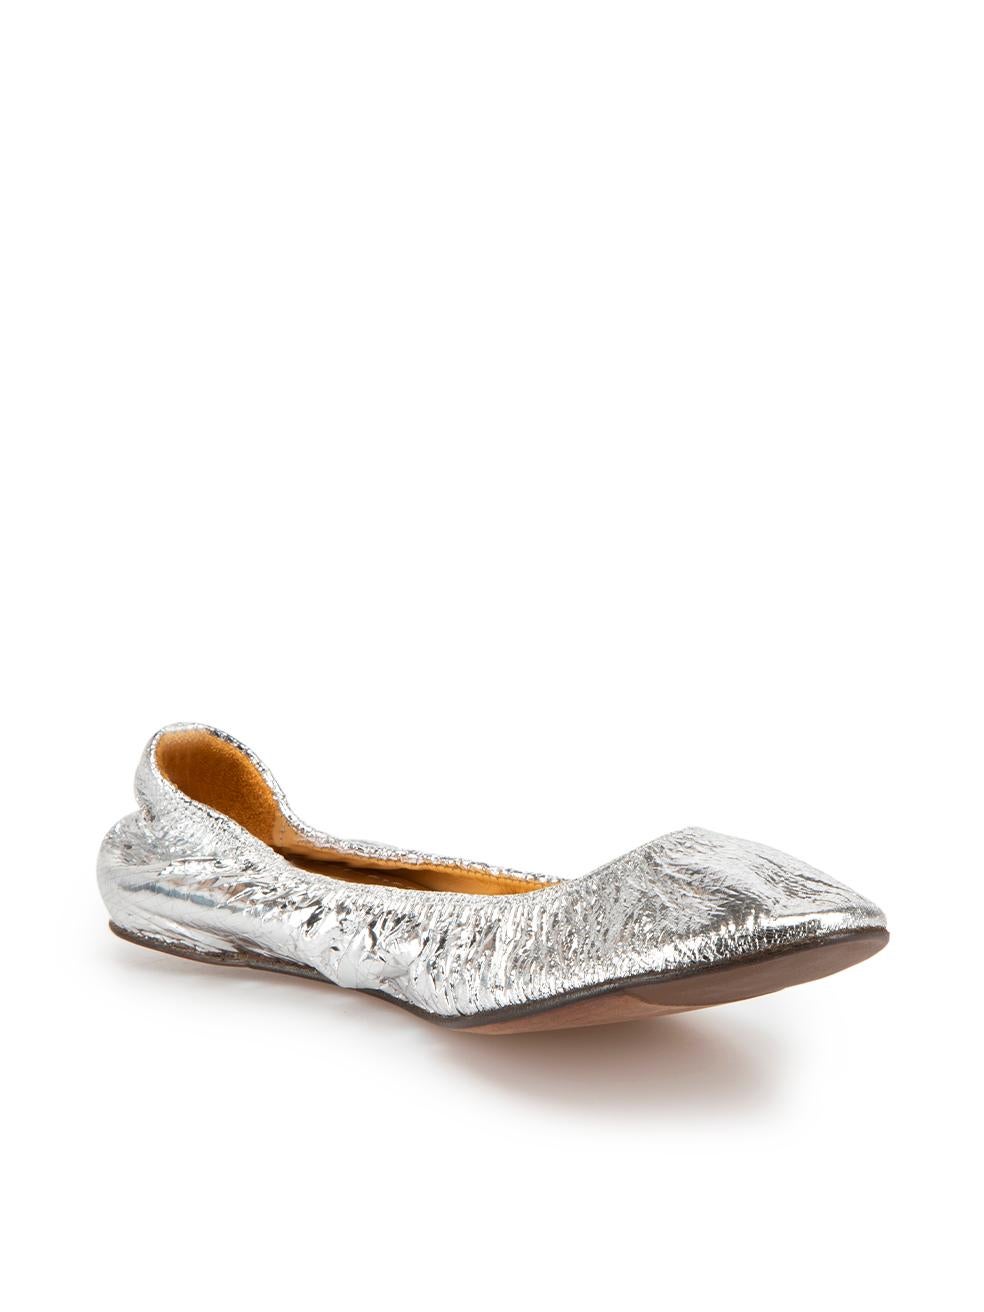 CONDITION is Very good. Hardly any visible wear to shoes is evident on this used Lanvin designer resale item.



Details


Summer 2008

Silver

Leather

Ballet flats

Round-toe

Slip-on

Craquelure effect



 

Made in